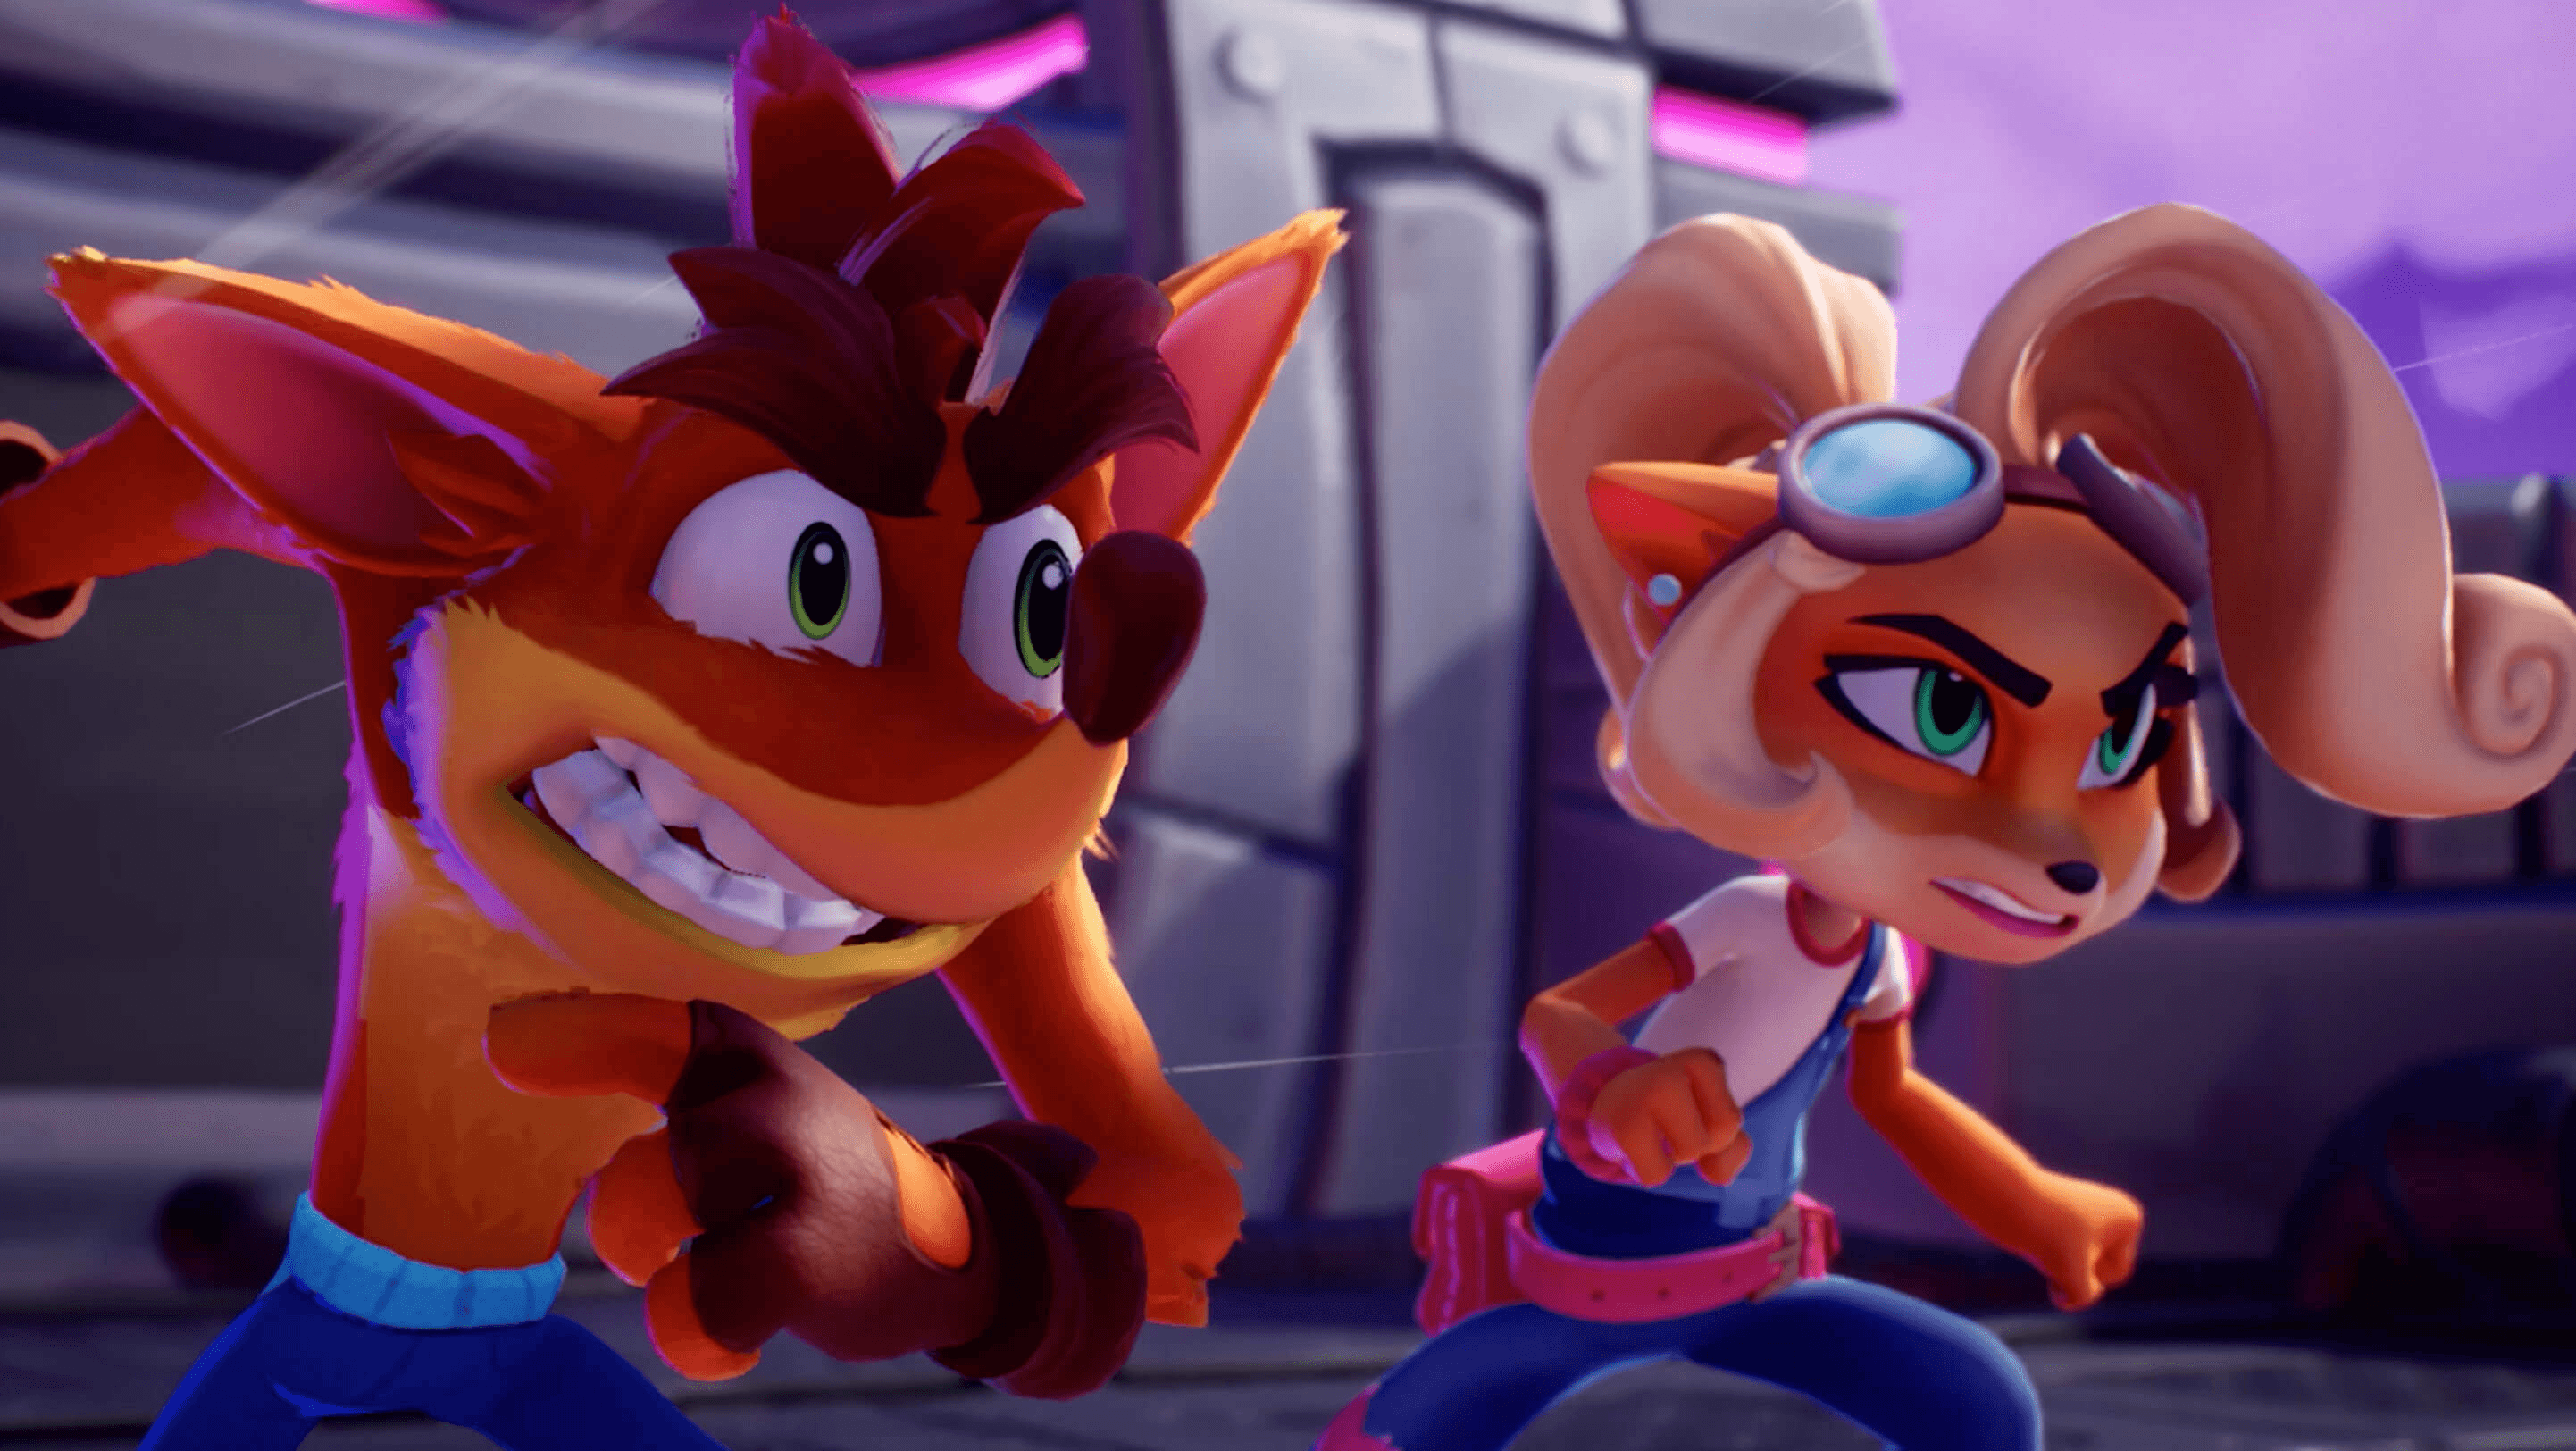 Crash and Coco ready for battle